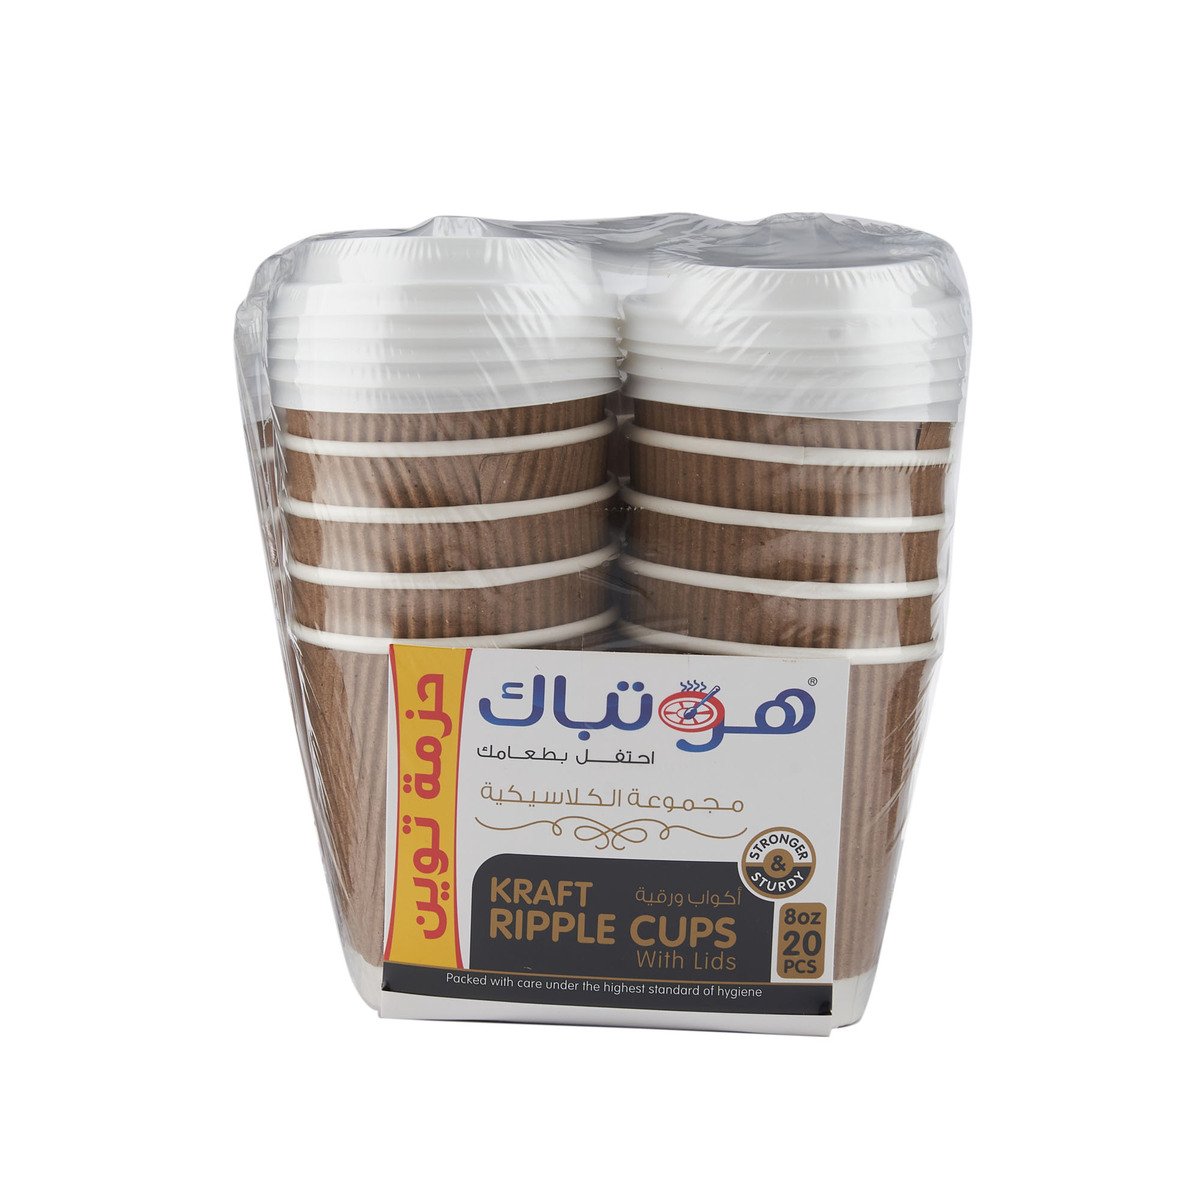 Hotpack Kraft Ripple Cups With Lids Size 8oz 20pcs